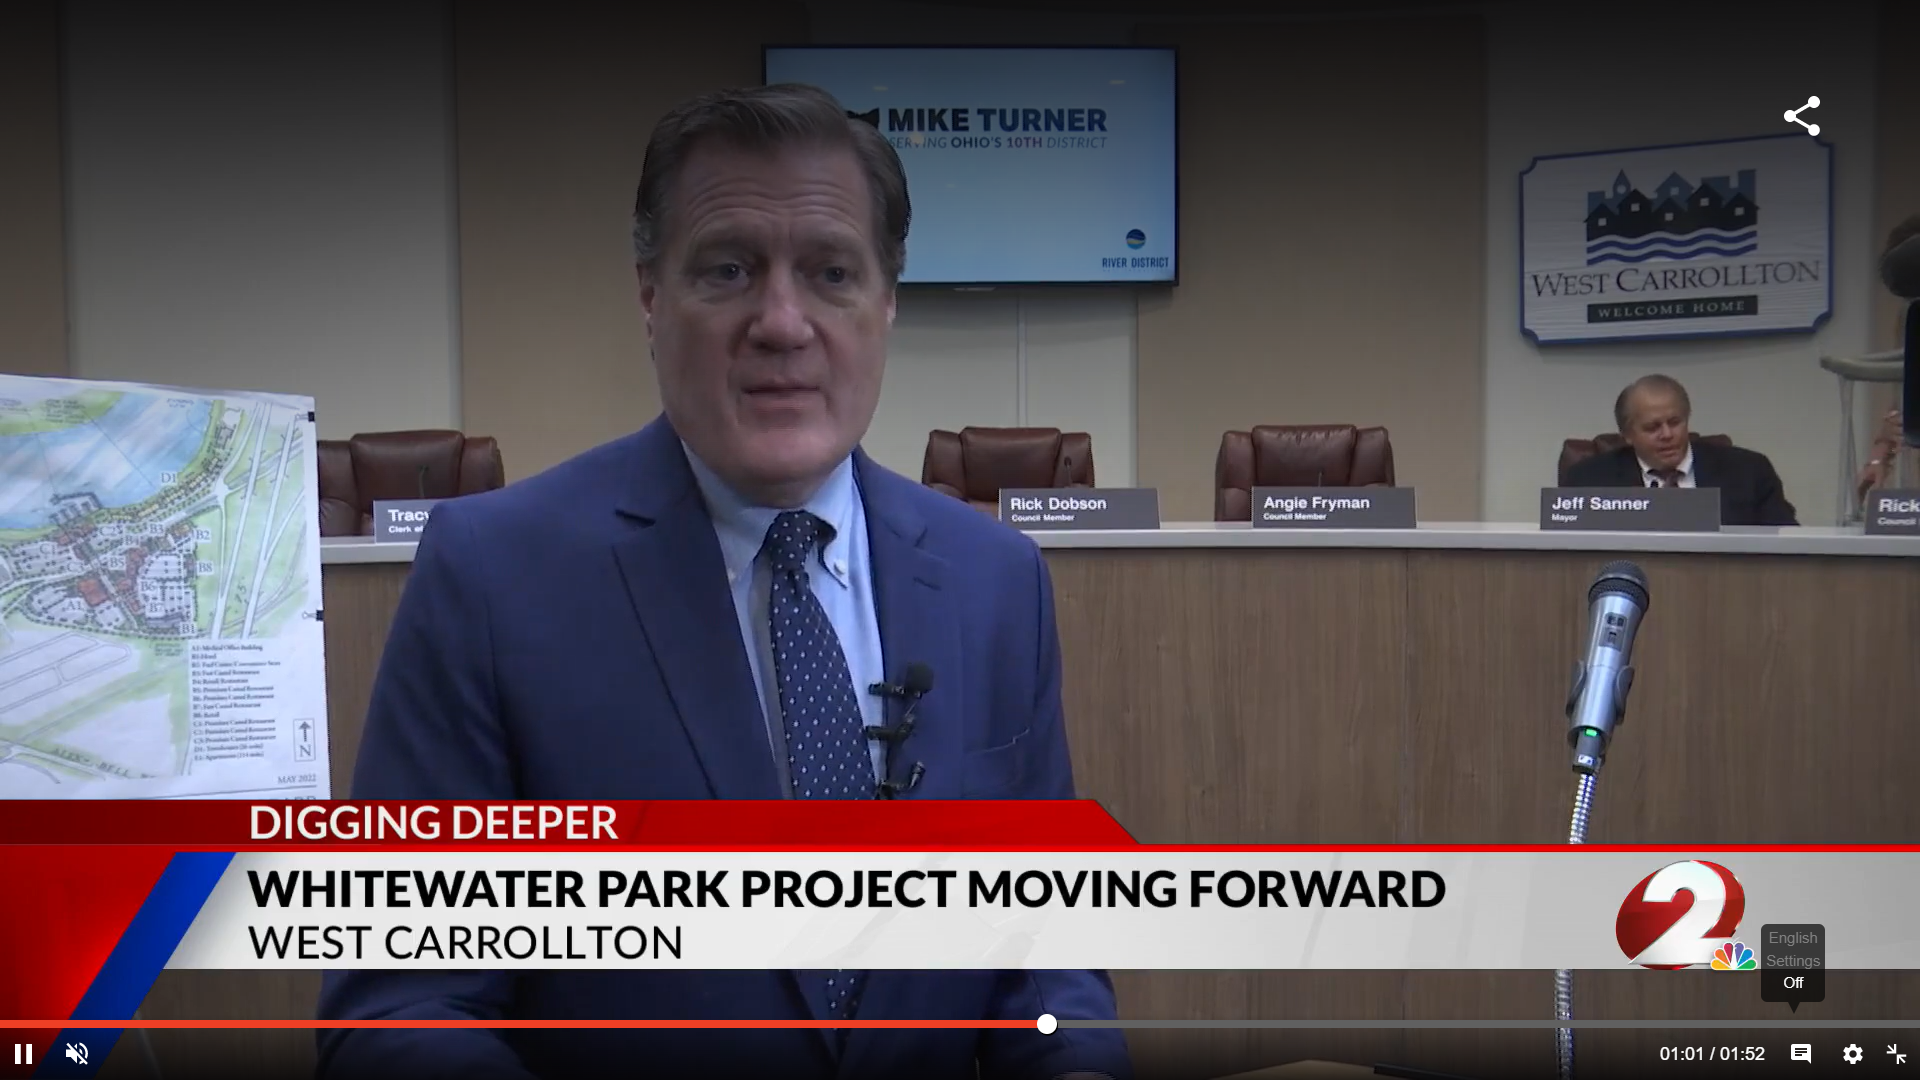 Whitewater Park project moves forward in West Carrollton